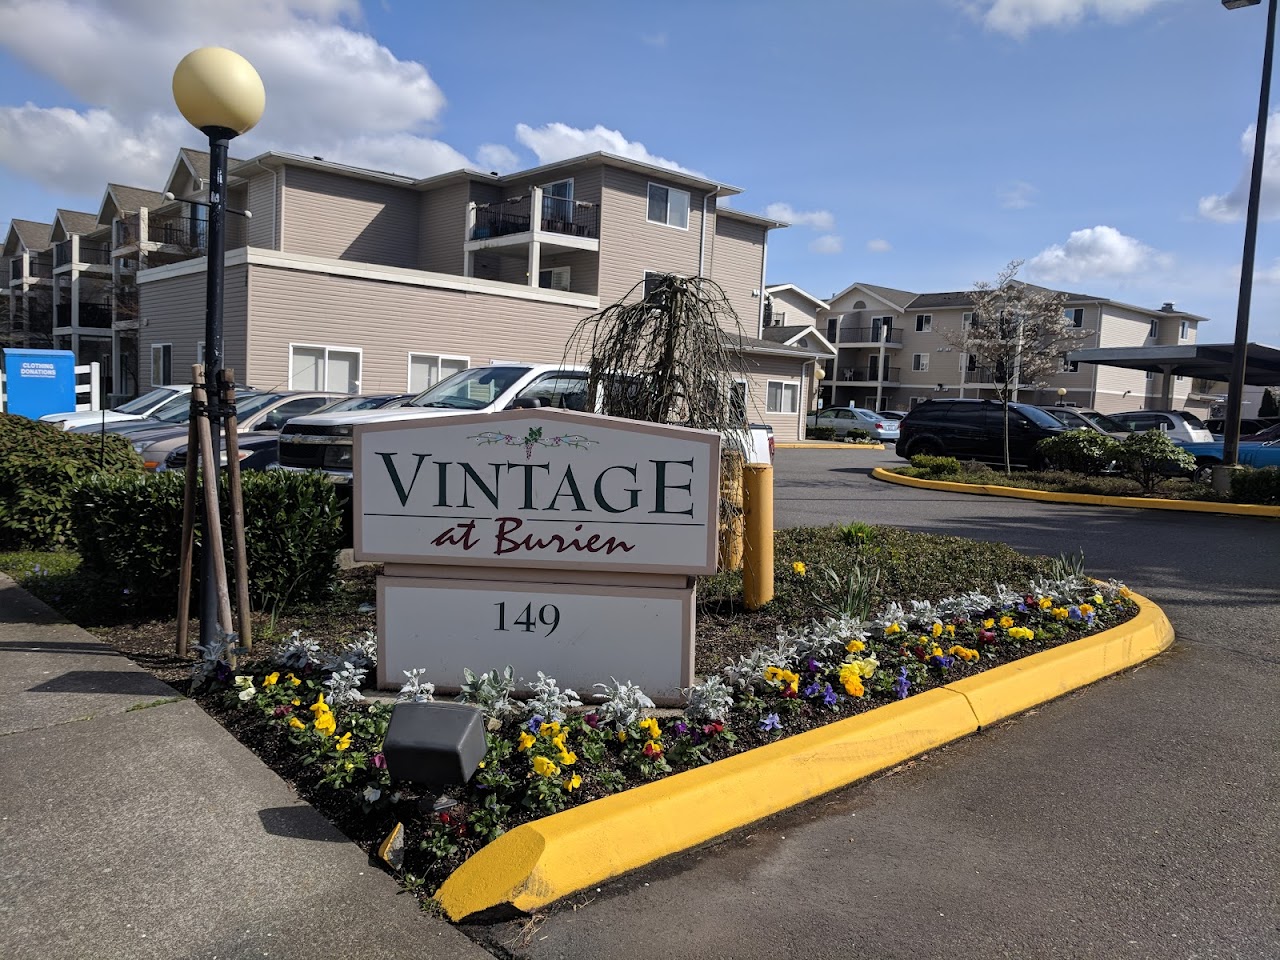 Photo of VINTAGE AT BURIEN. Affordable housing located at 149 140TH STREET SOUTH BURIEN, WA 98166